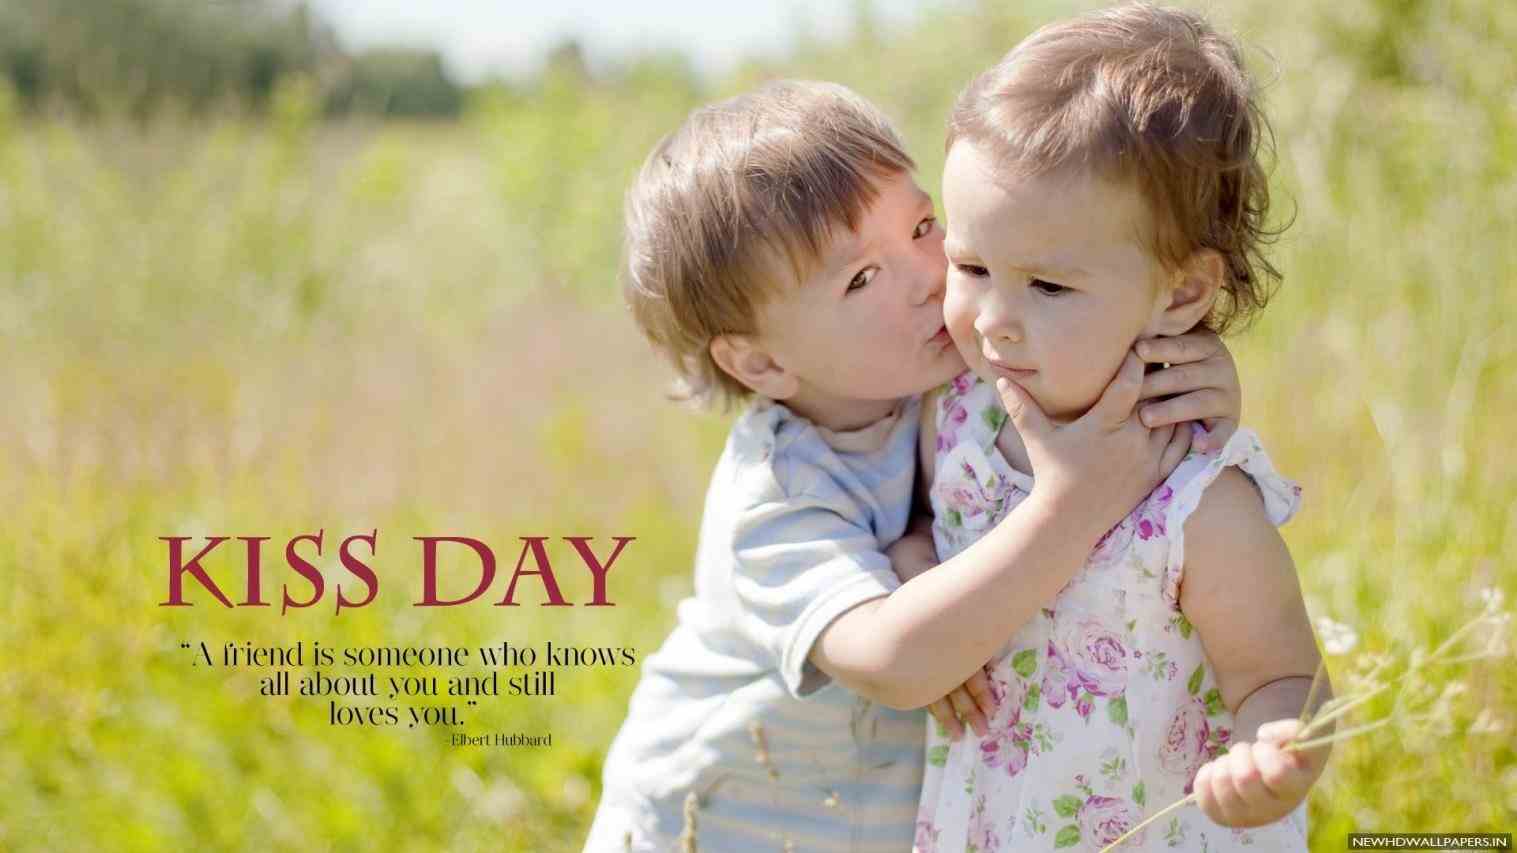 Baby Sweet Baby Boy And Girl In Love Love Images And - Happy Kiss Day Baby - HD Wallpaper 